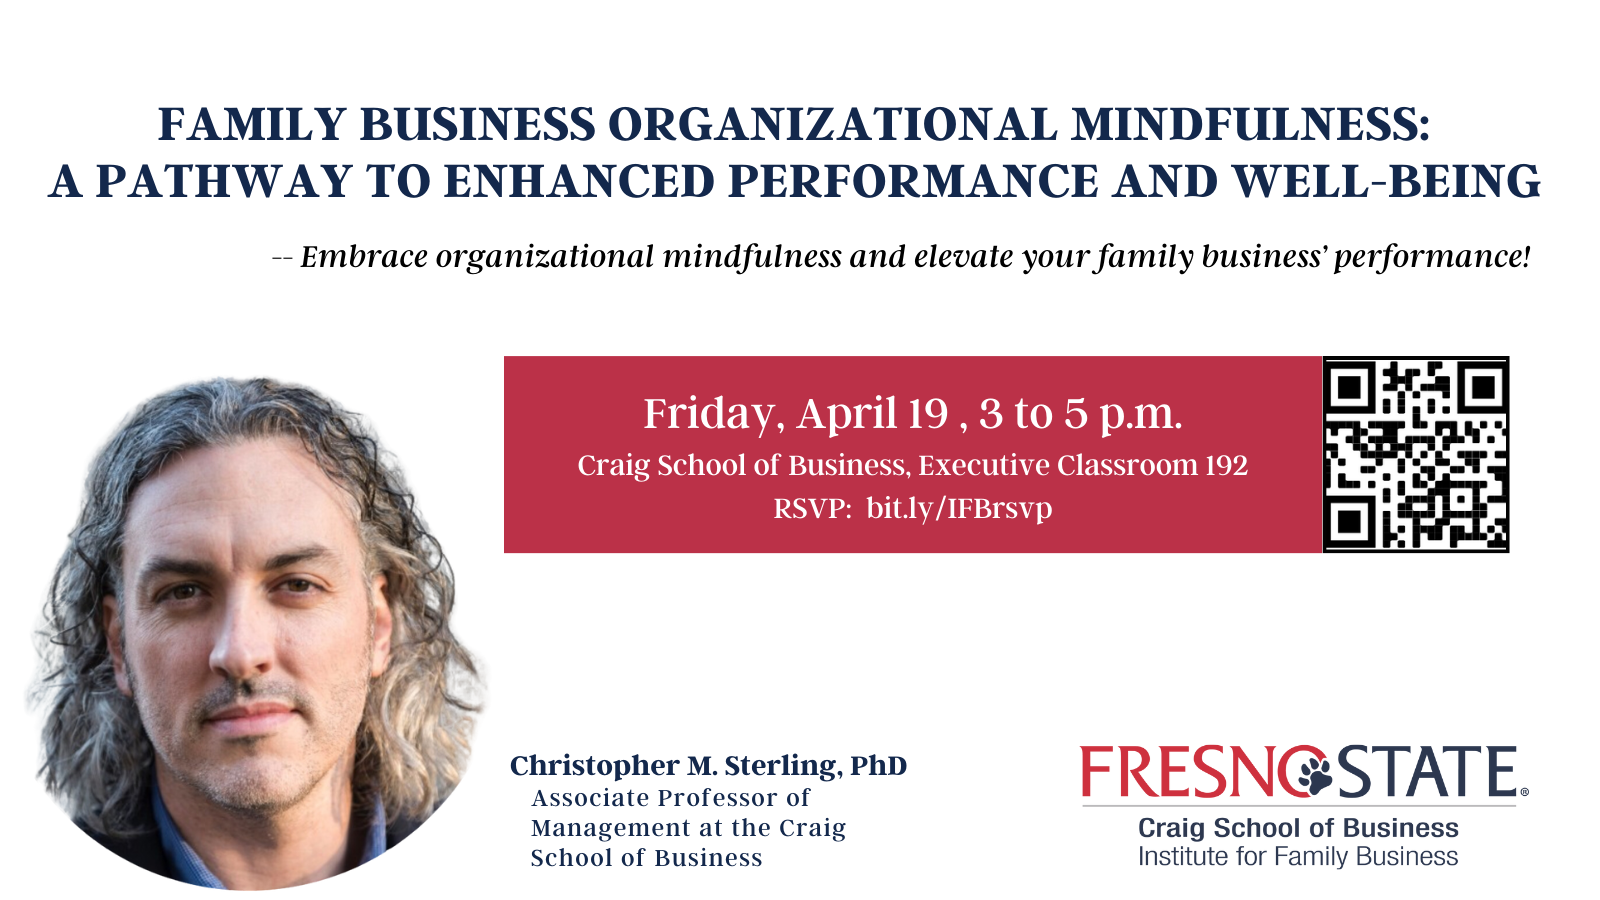 Family Business Oprganizational Mindfulness Event : A pathway to Enhanced Performance And Well-Being